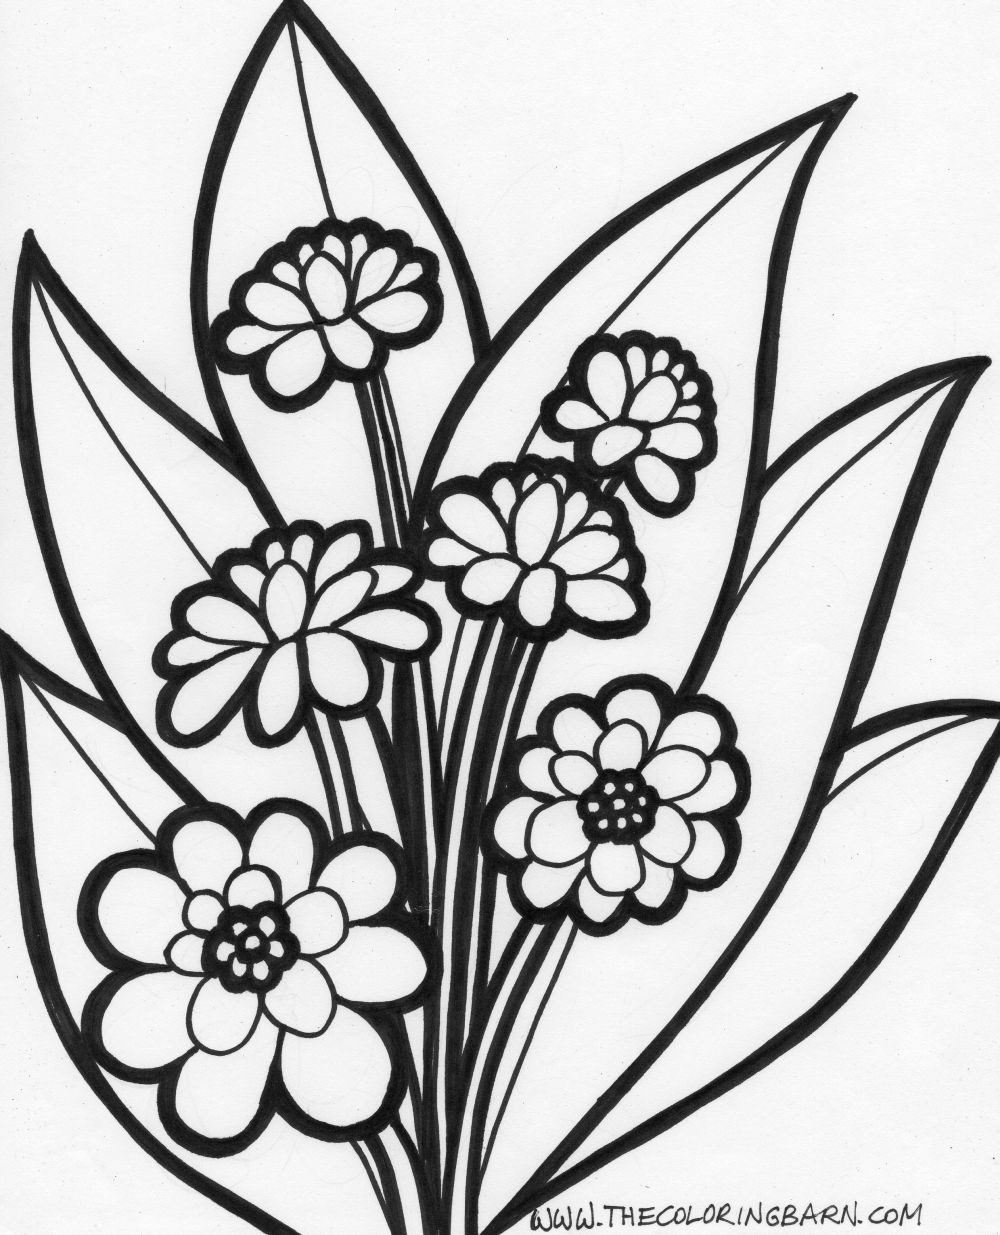 Large Print Coloring Pages For Adults at GetColoringscom